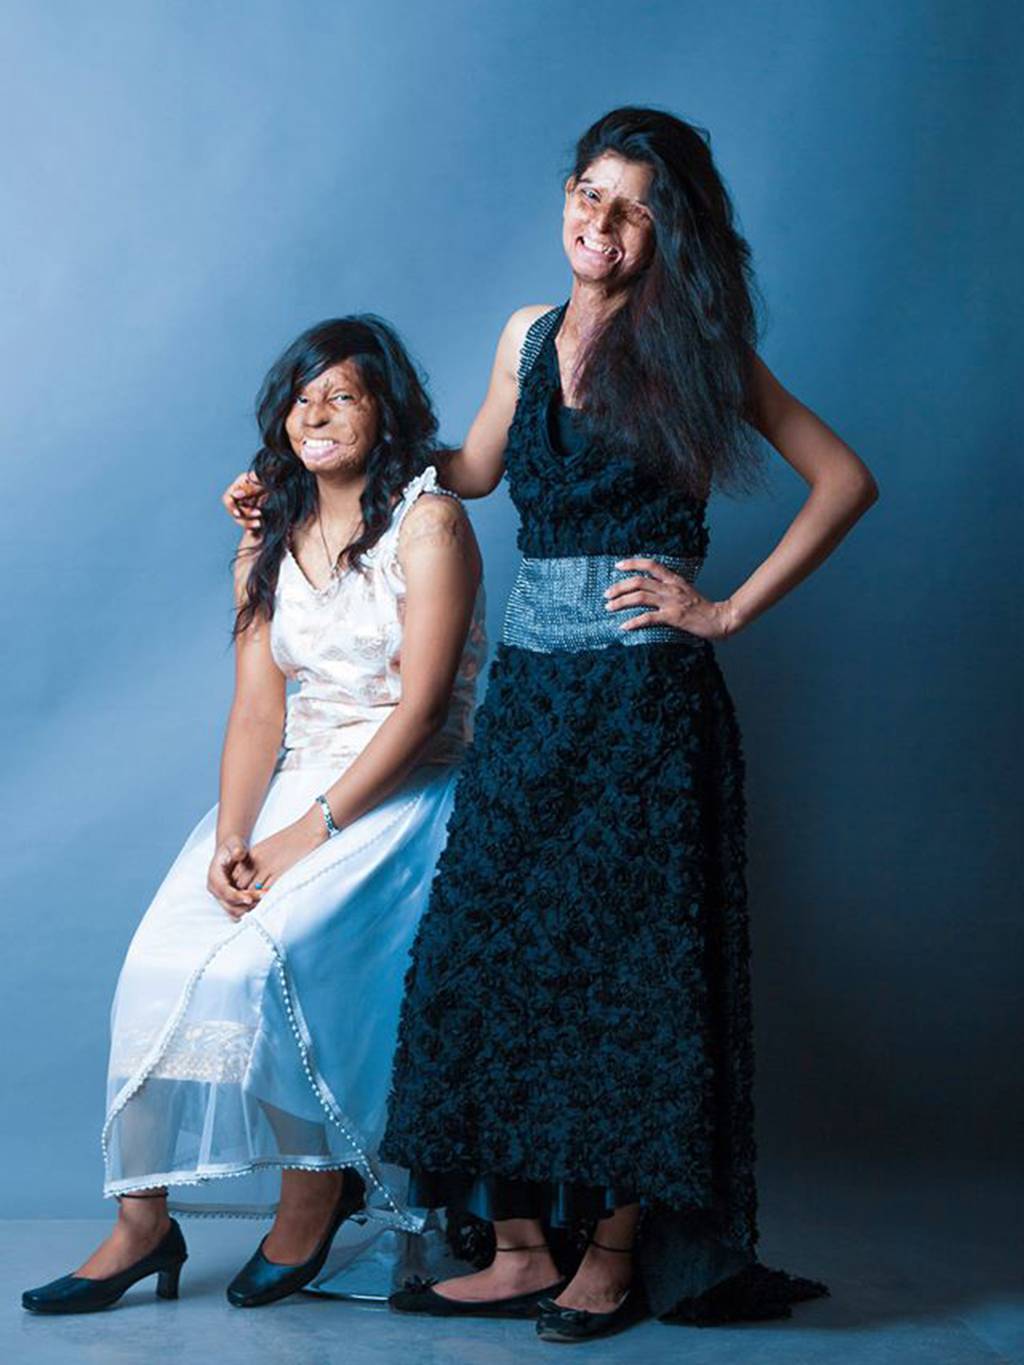 myvoicemyright:   Acid attack survivors in India model new clothing range for powerful